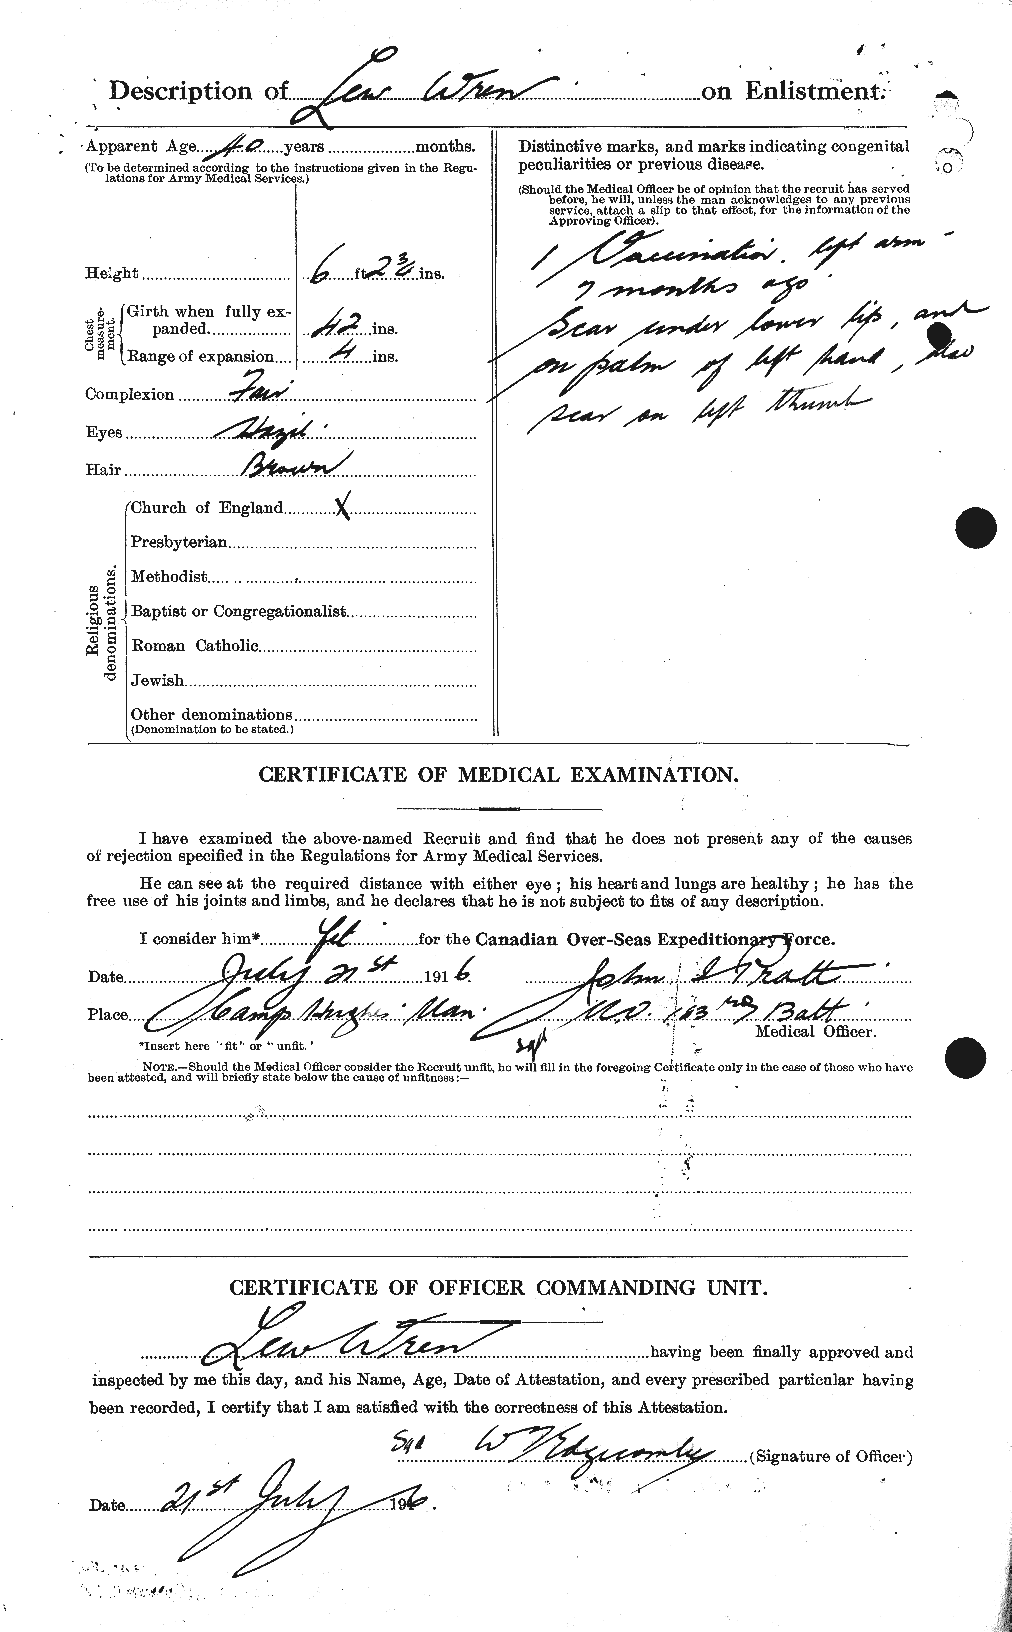 Personnel Records of the First World War - CEF 687587b